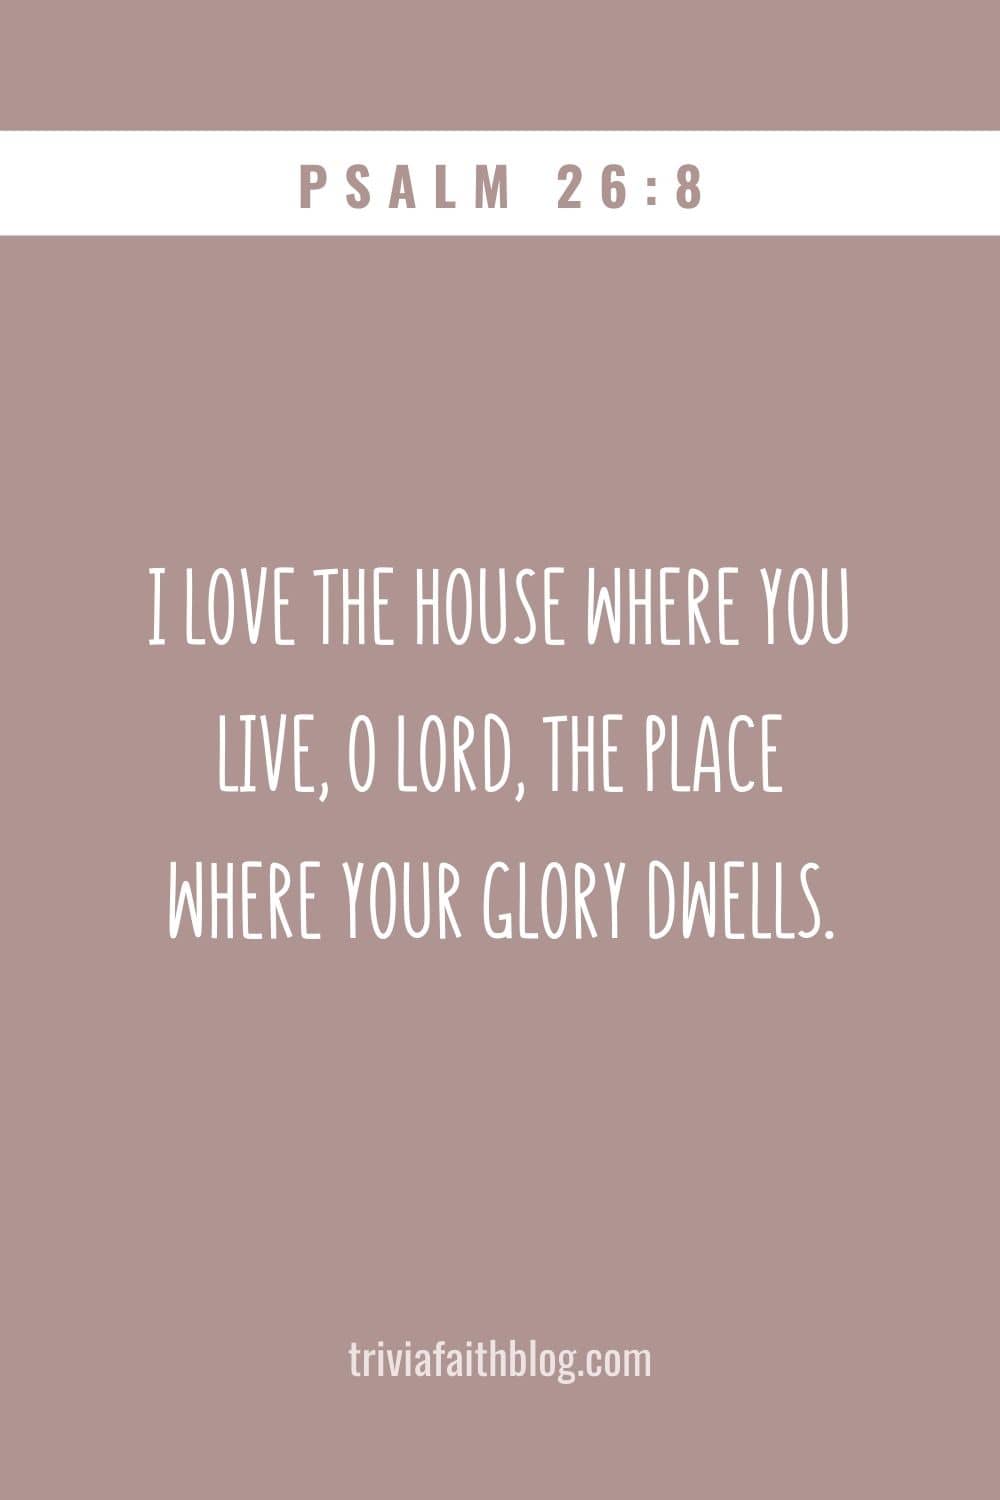 I love the house where you live, O Lord, the place where your glory dwells